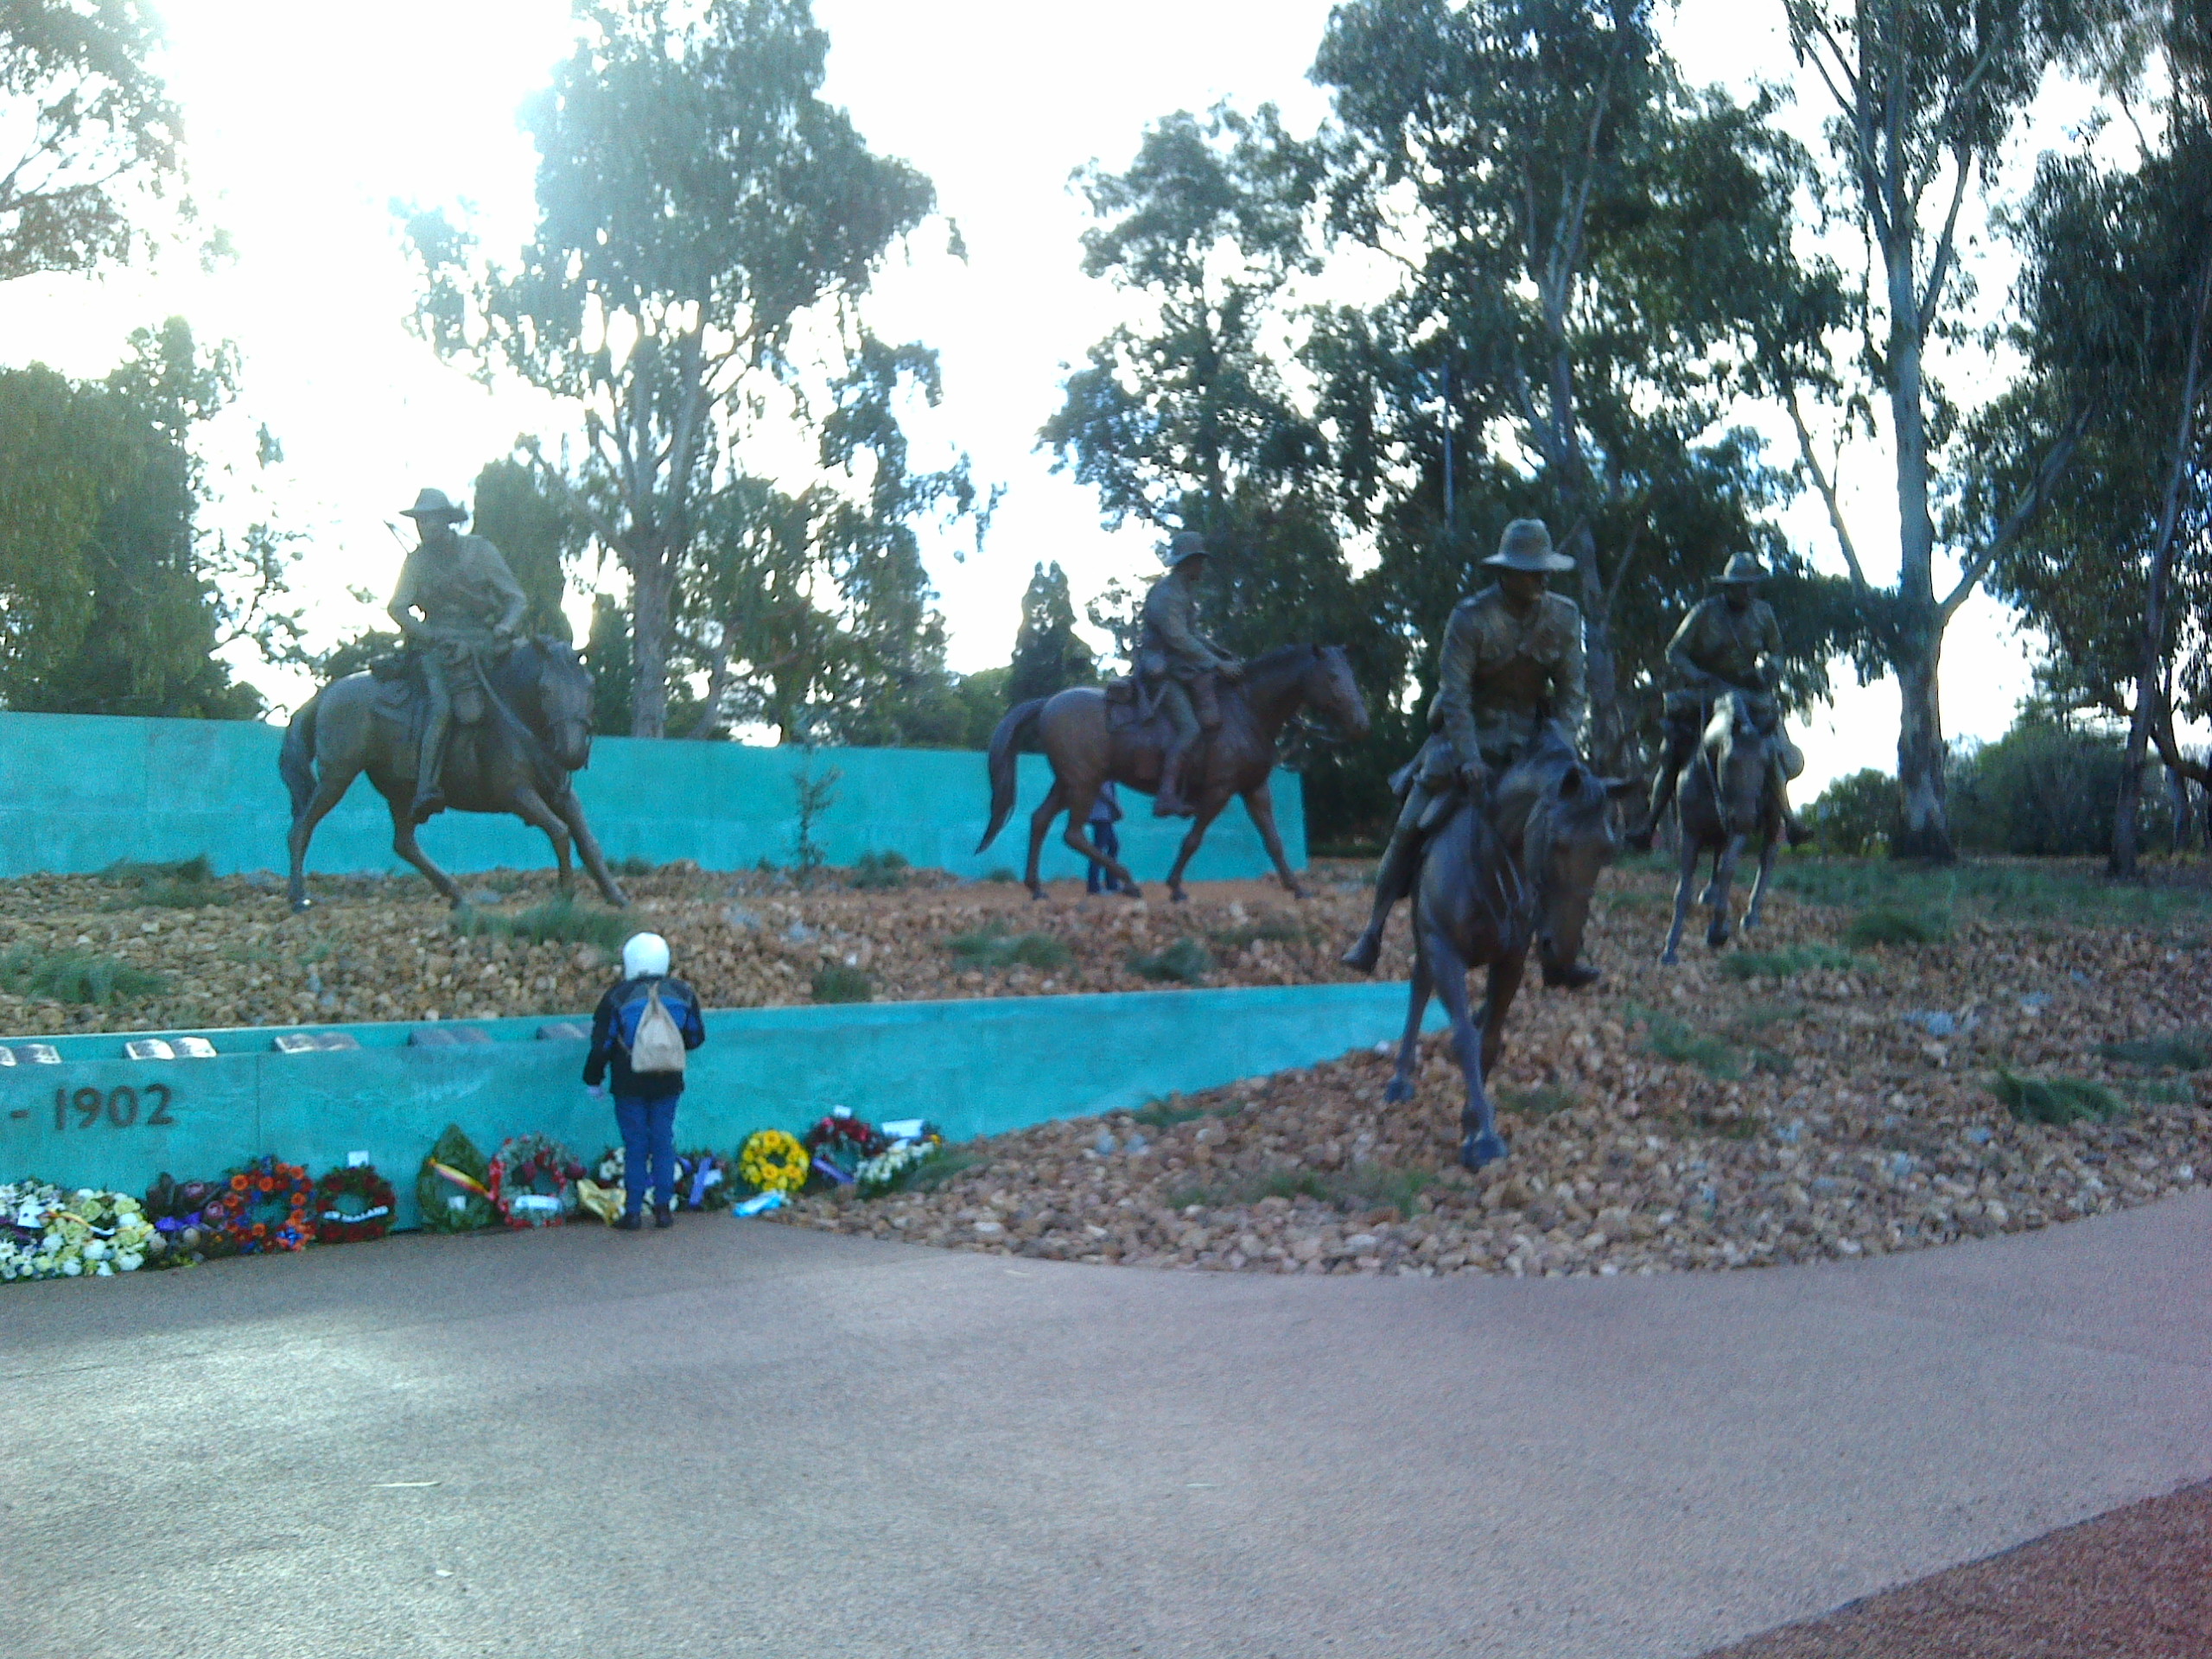 Photo of Boer War Memorial, Canberra which contains statues of horses and riders.